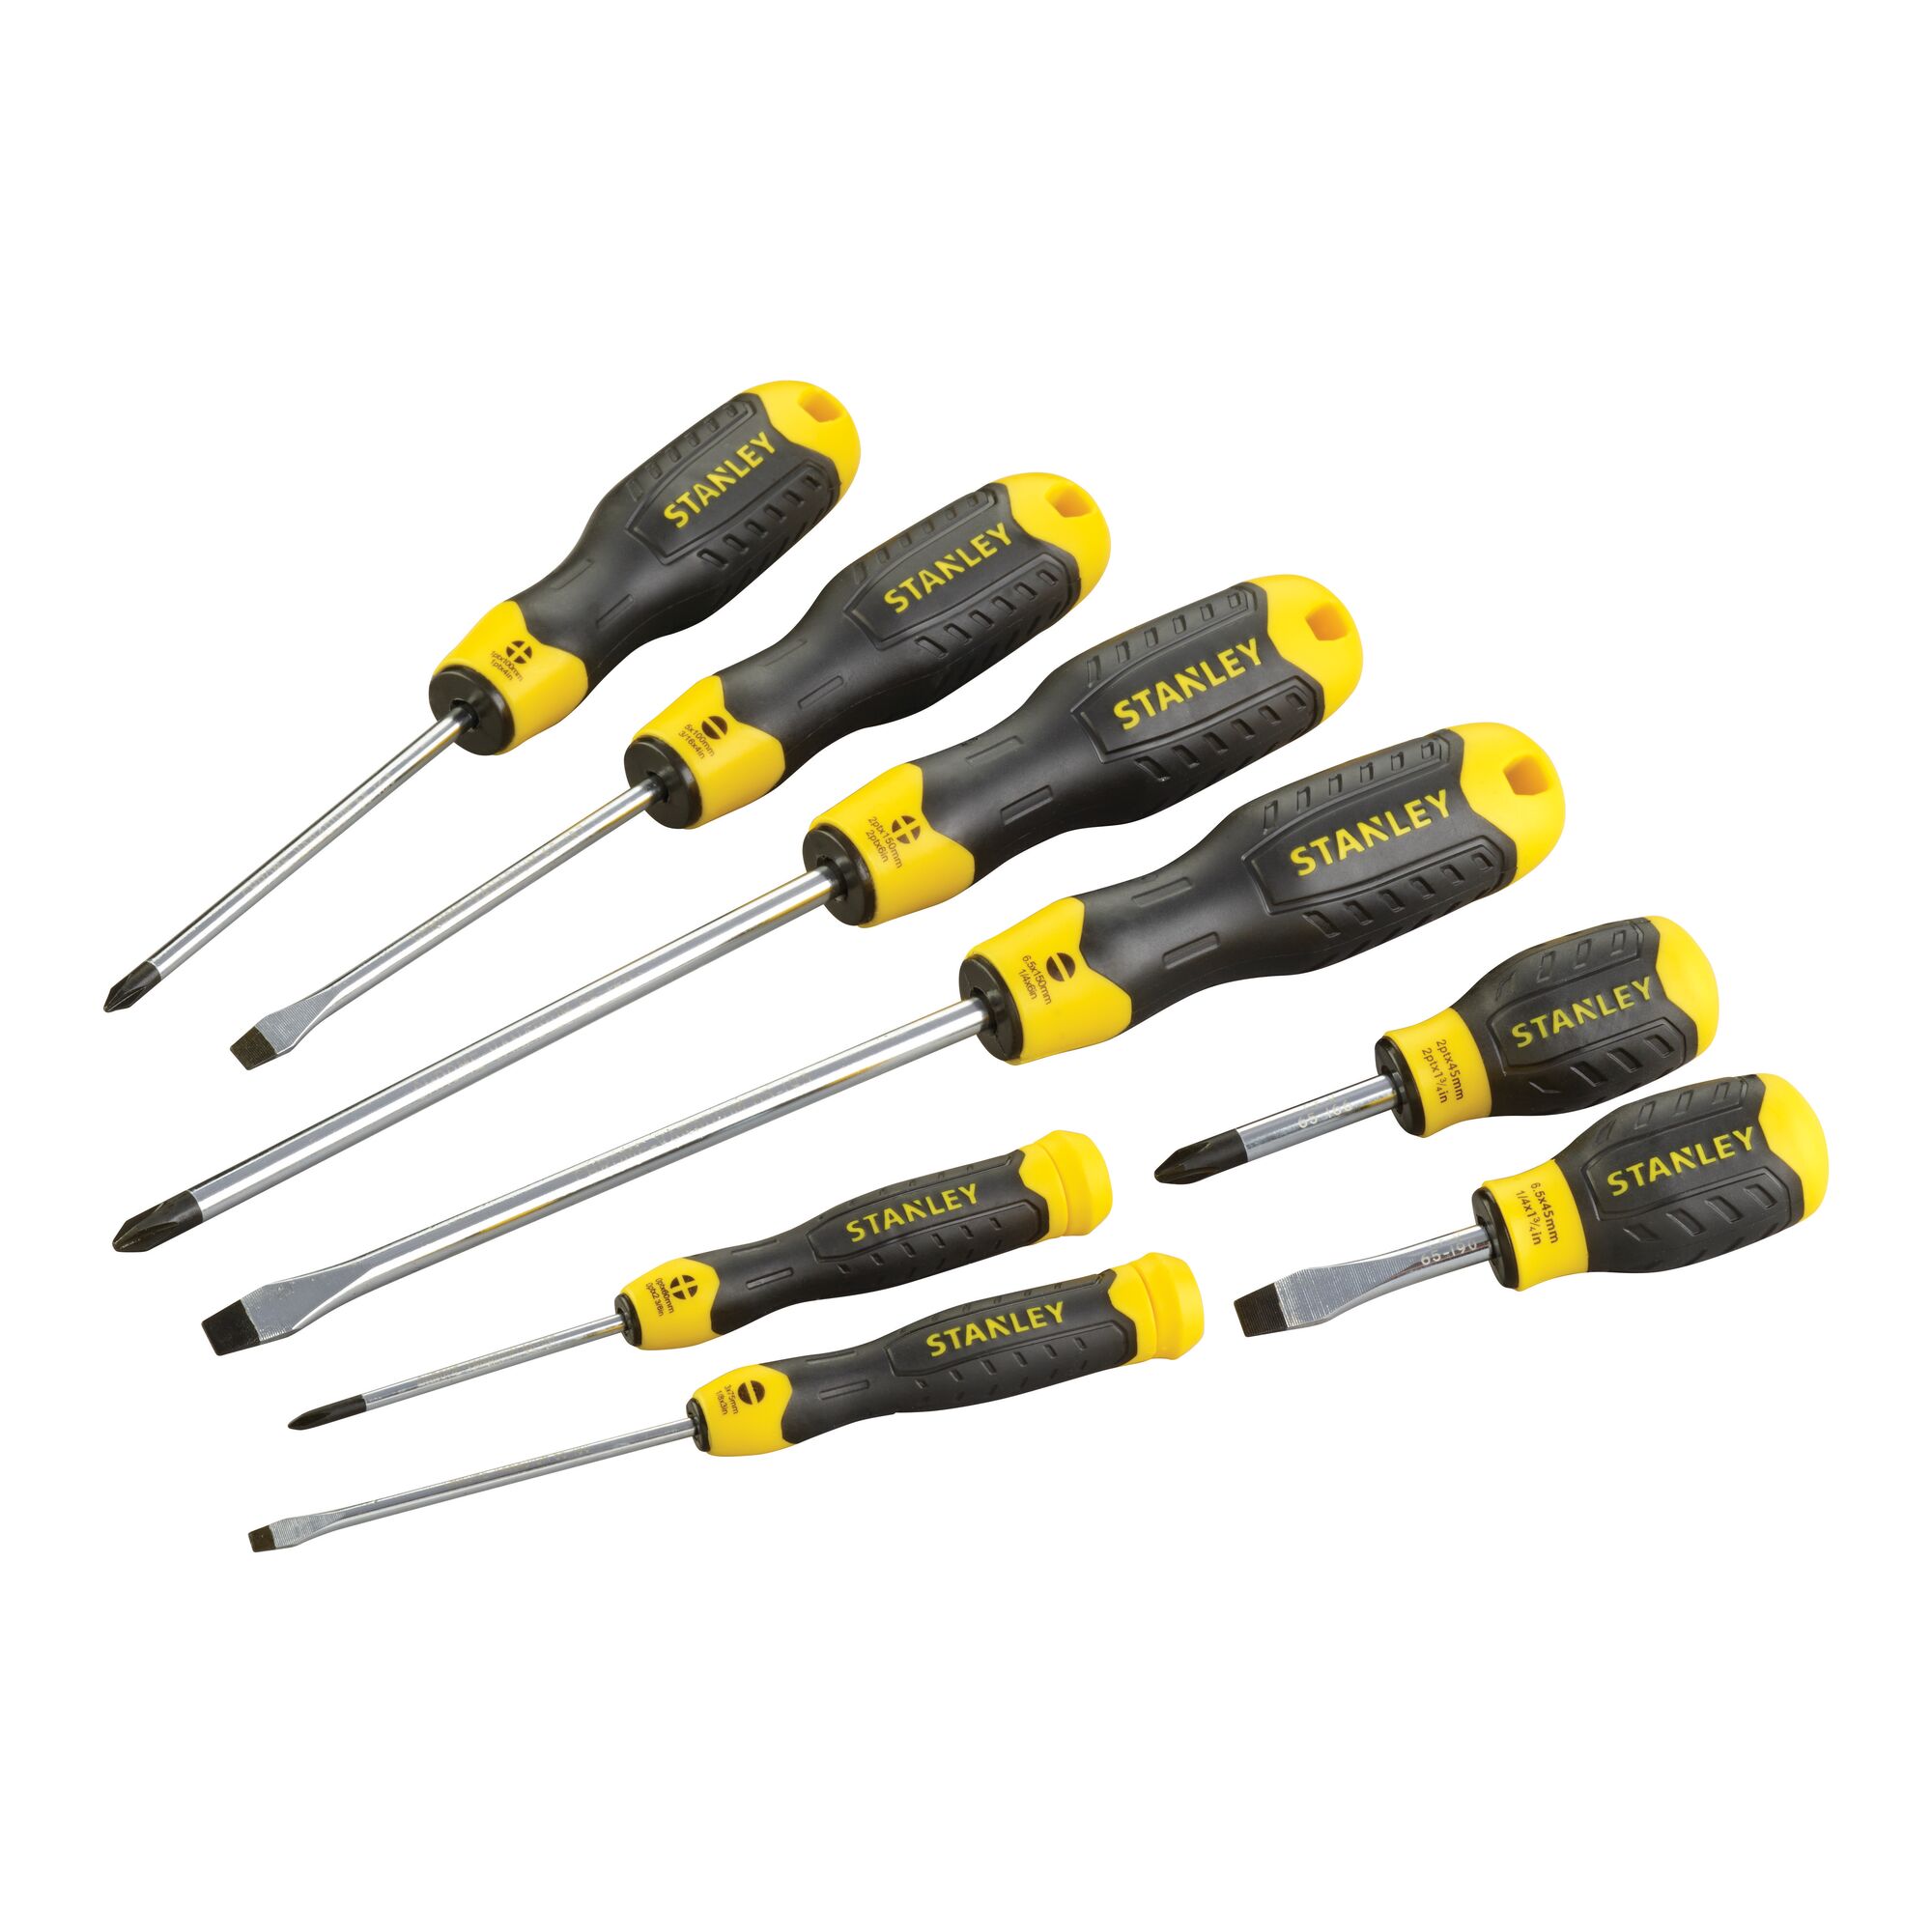 Stanley Tools Cushion Grip Screwdriver Phillips 0pt X 60mm for sale online 